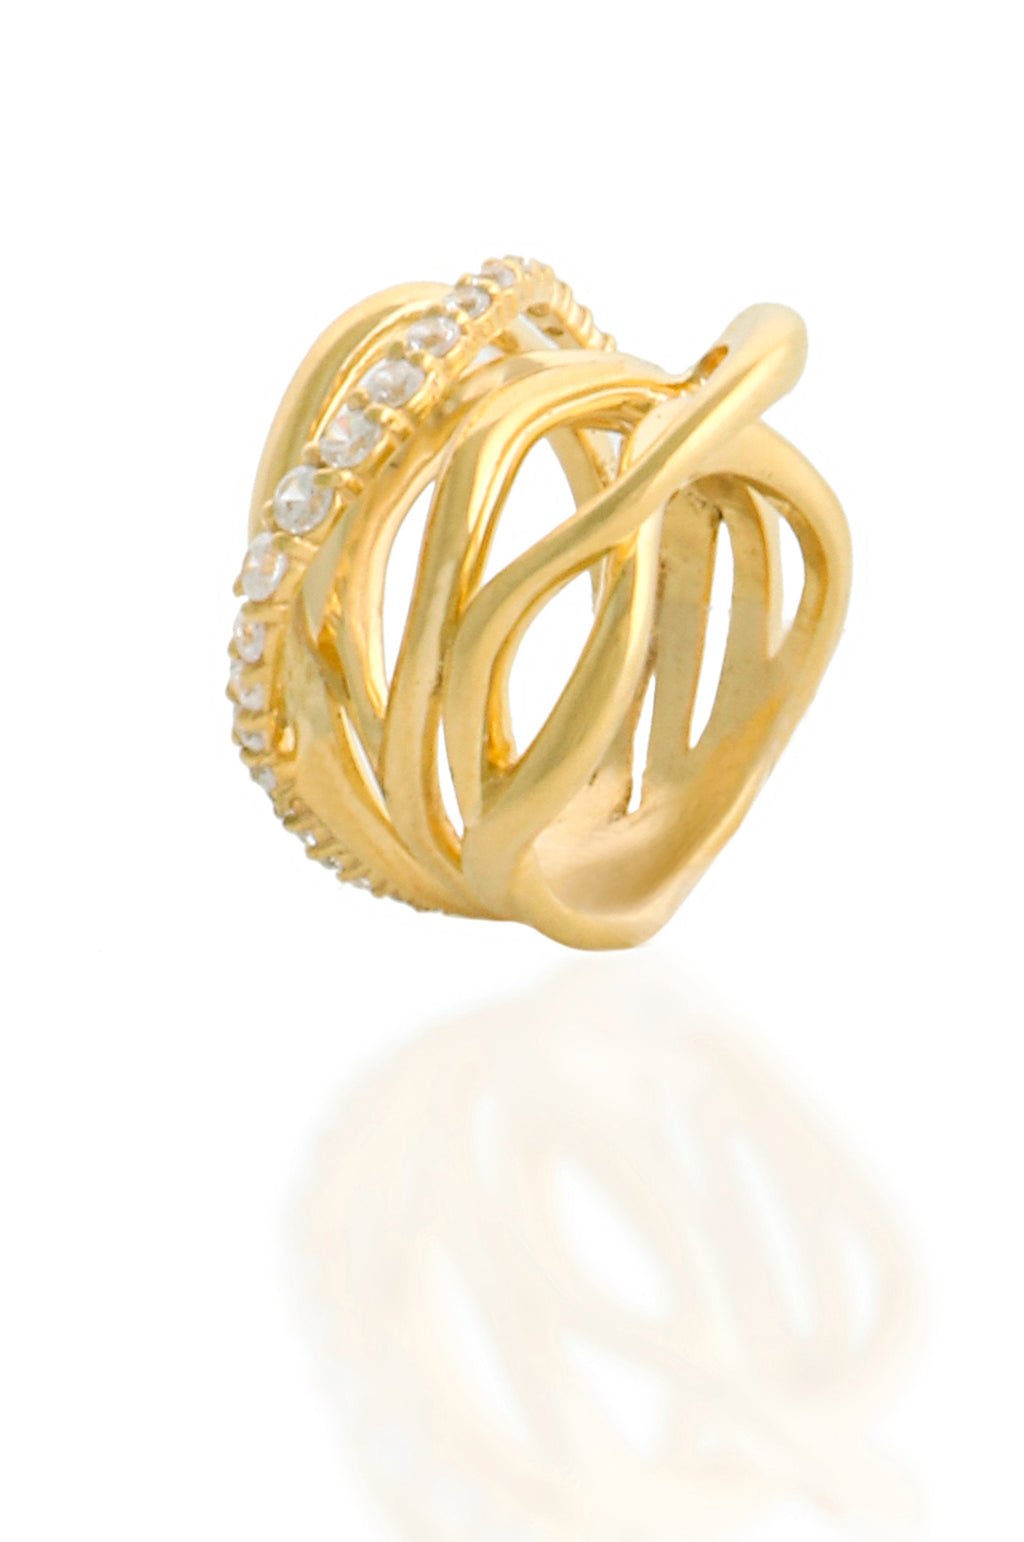 GOLD PLATED STATEMENT PAVE WAVES RING